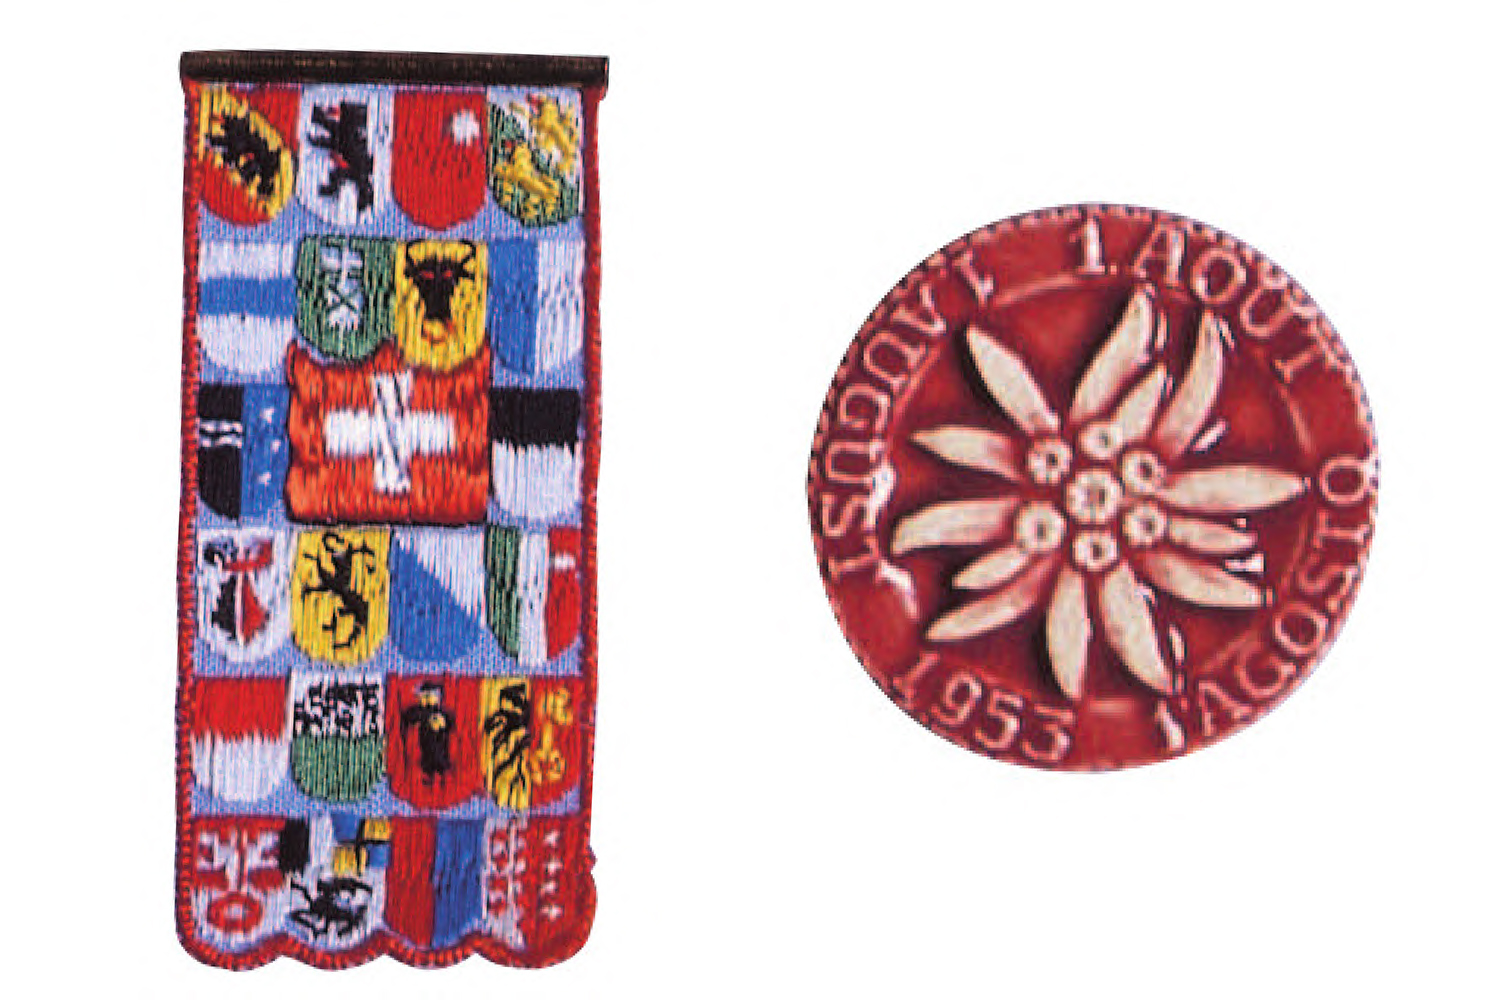 1 stitched emblem depicting the flags of all the cantons in Switzerland, 1 depicting an Edelweis flower